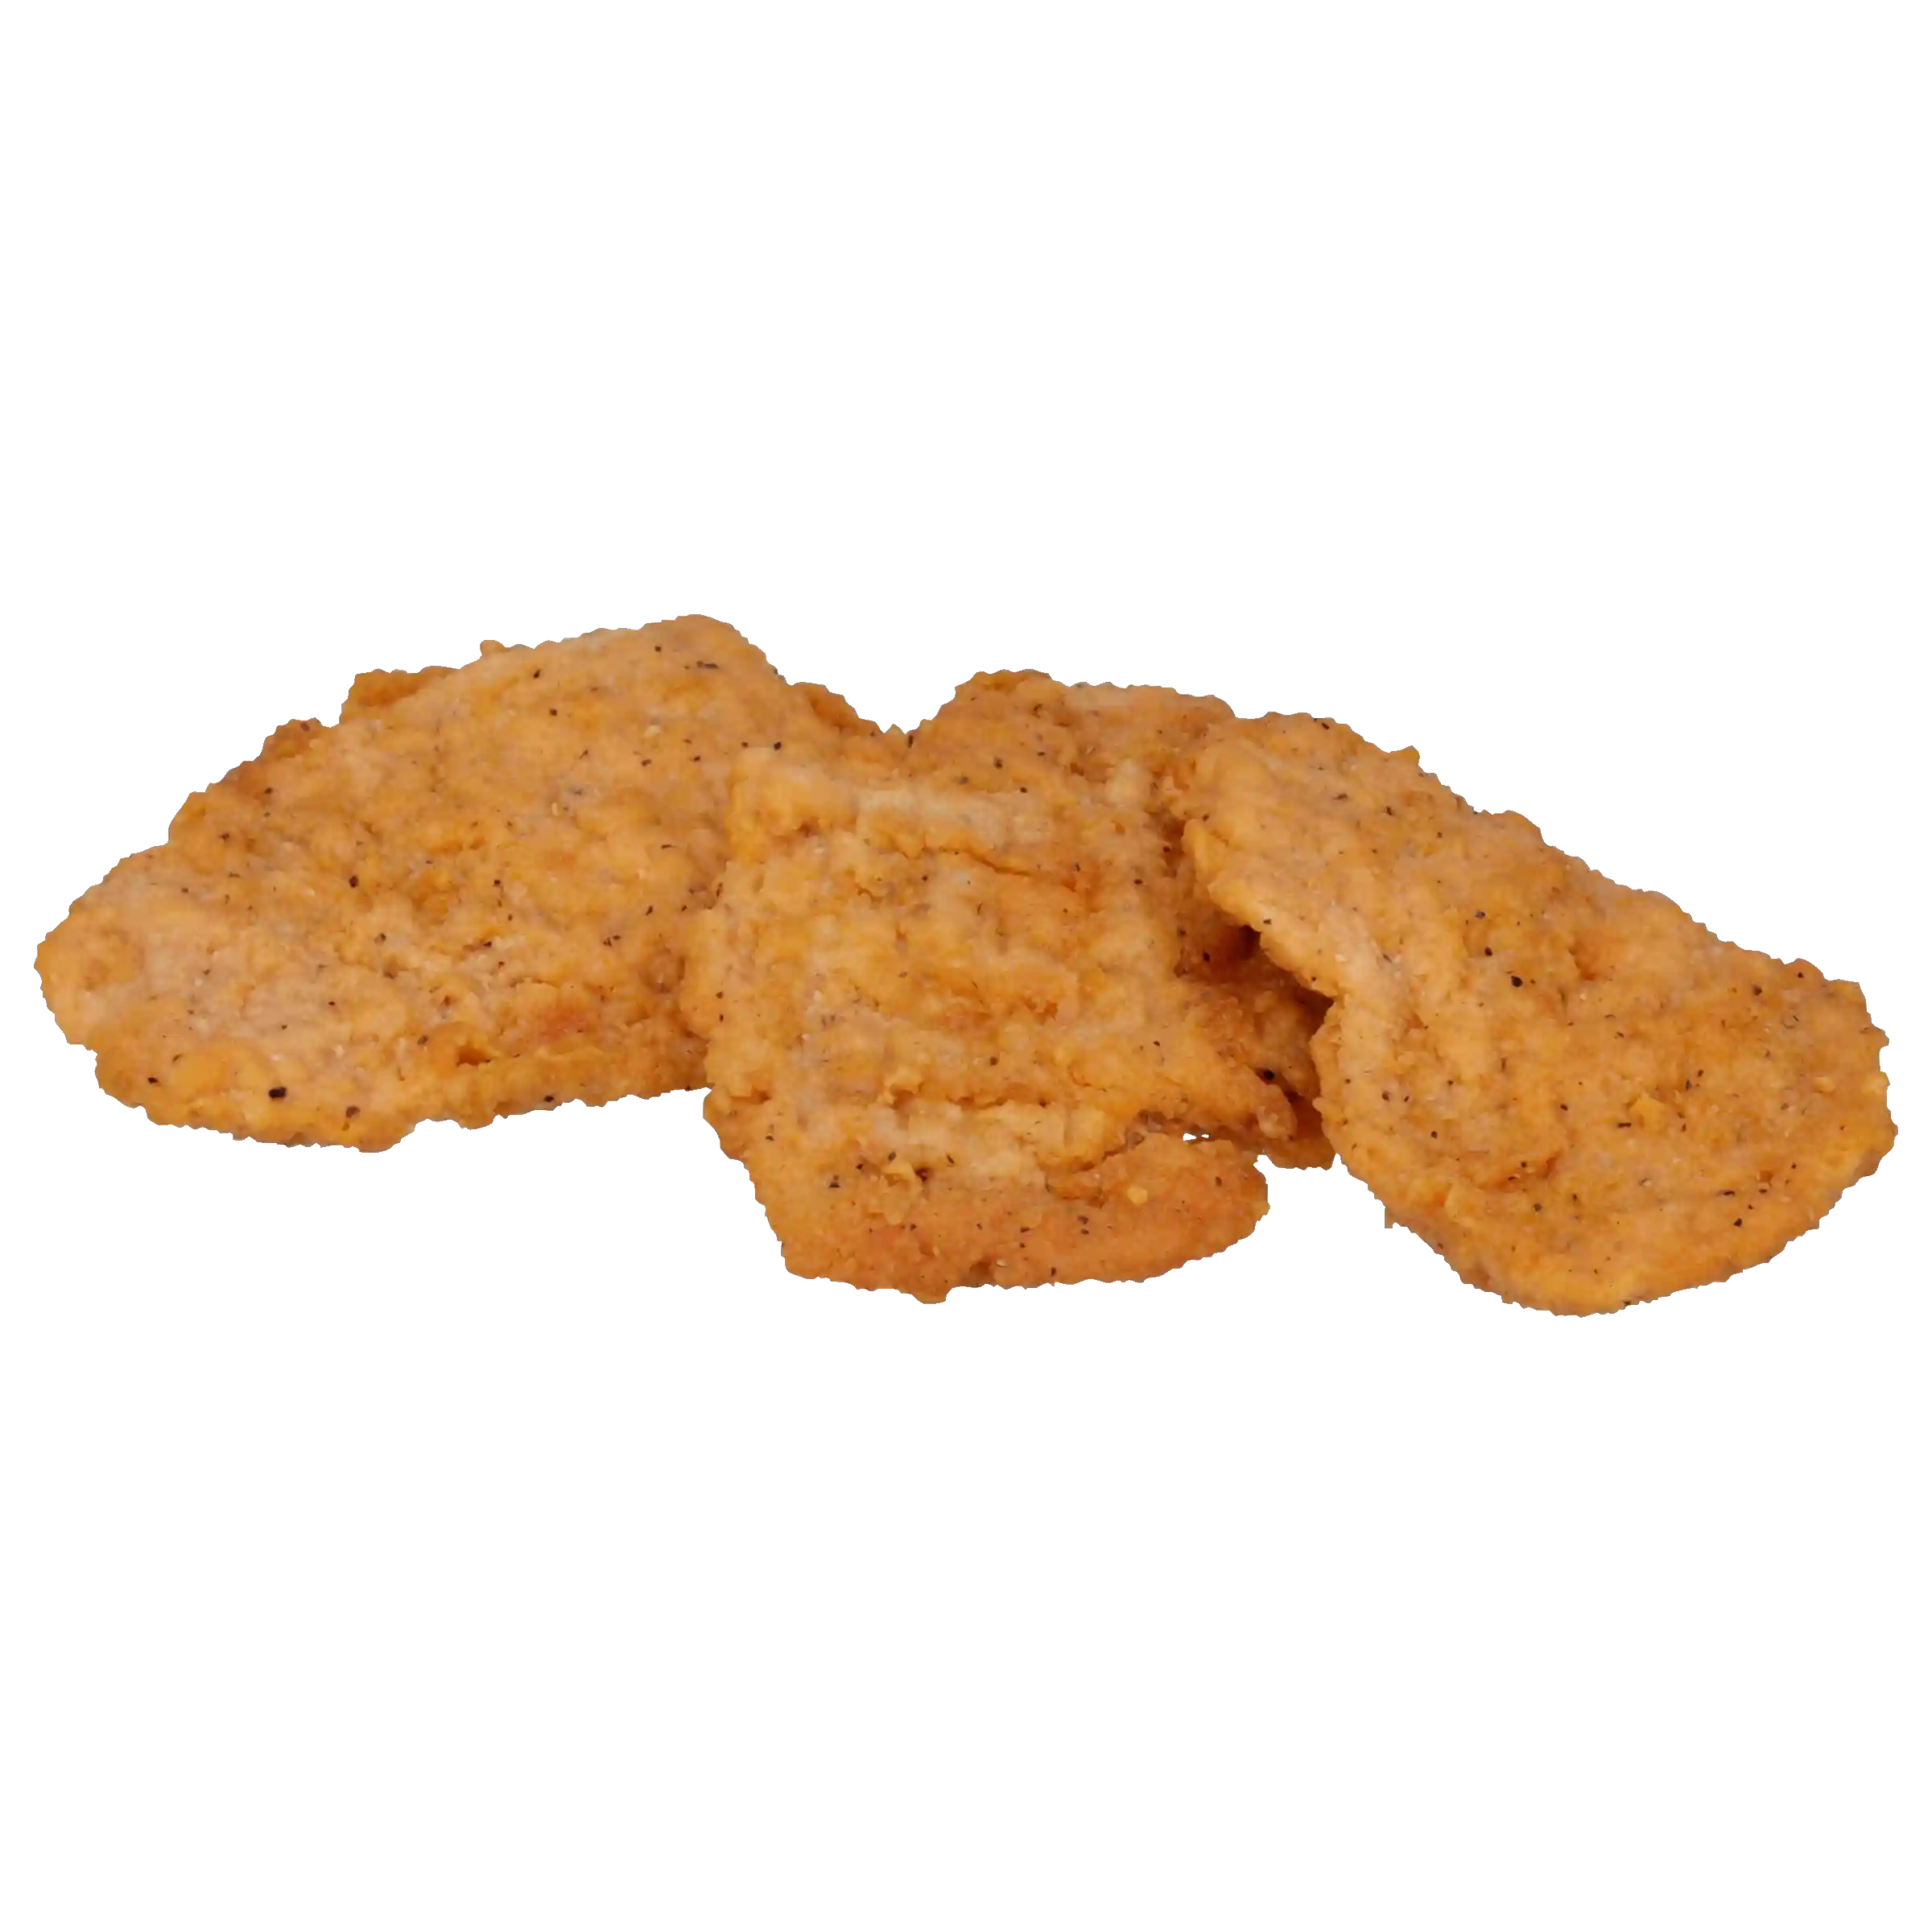 Tyson Red Label® Uncooked Hot & Spicy Chicken Breast Filet Fritters, 4 oz. https://images.salsify.com/image/upload/s--YmMpi_89--/q_25/iiplfdsxfgeat4su4o3v.webp